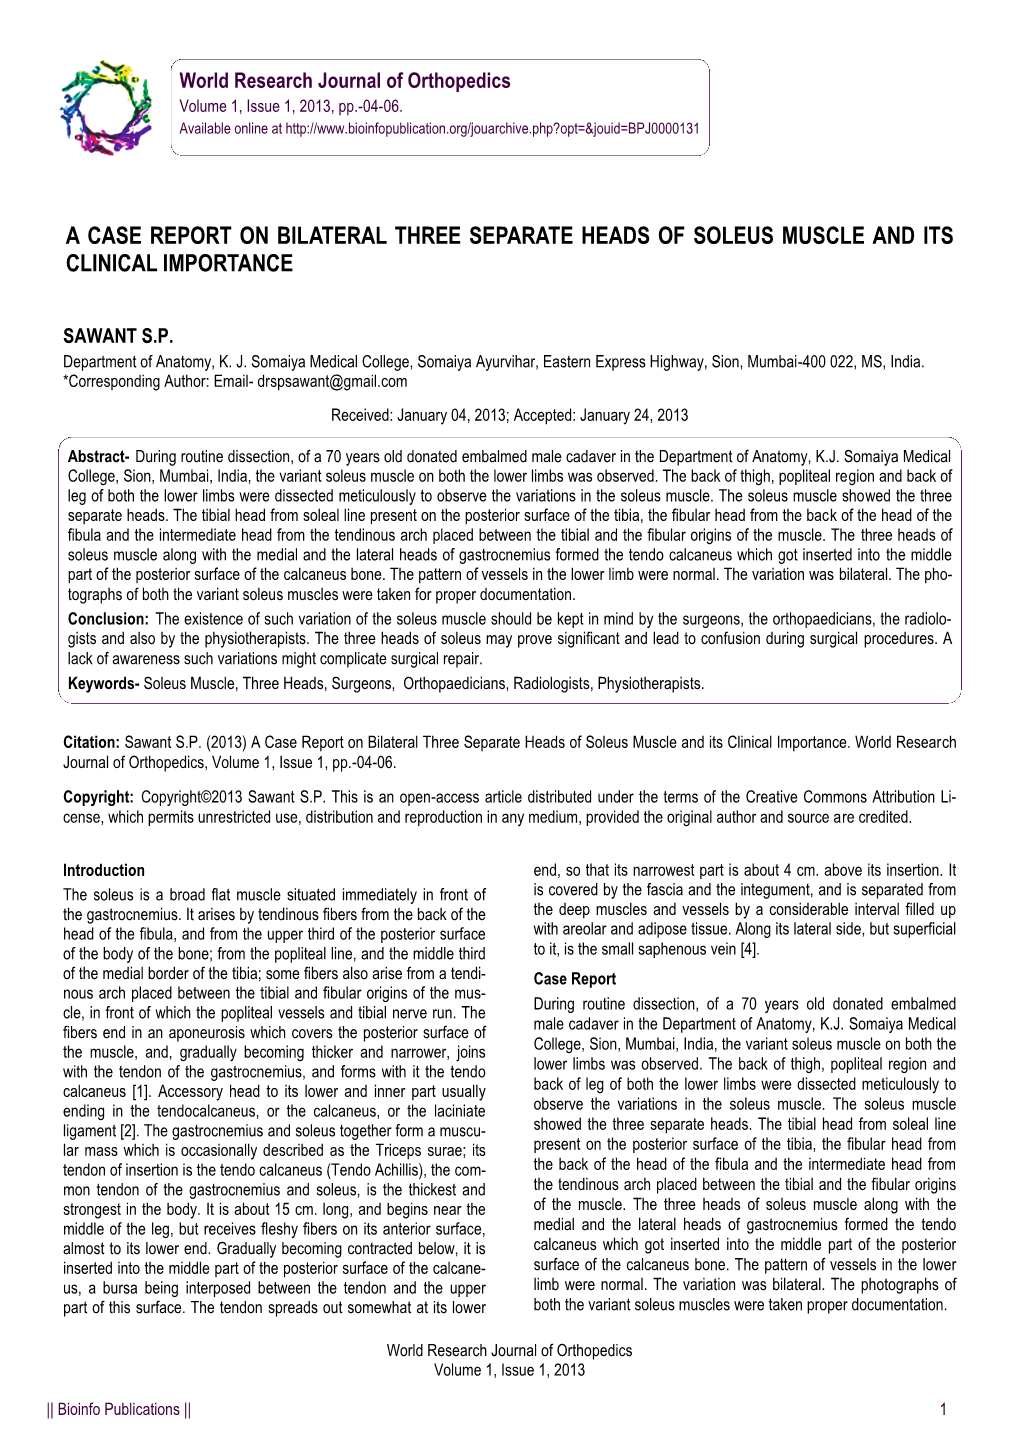 A Case Report on Bilateral Three Separate Heads of Soleus Muscle and Its Clinical Importance